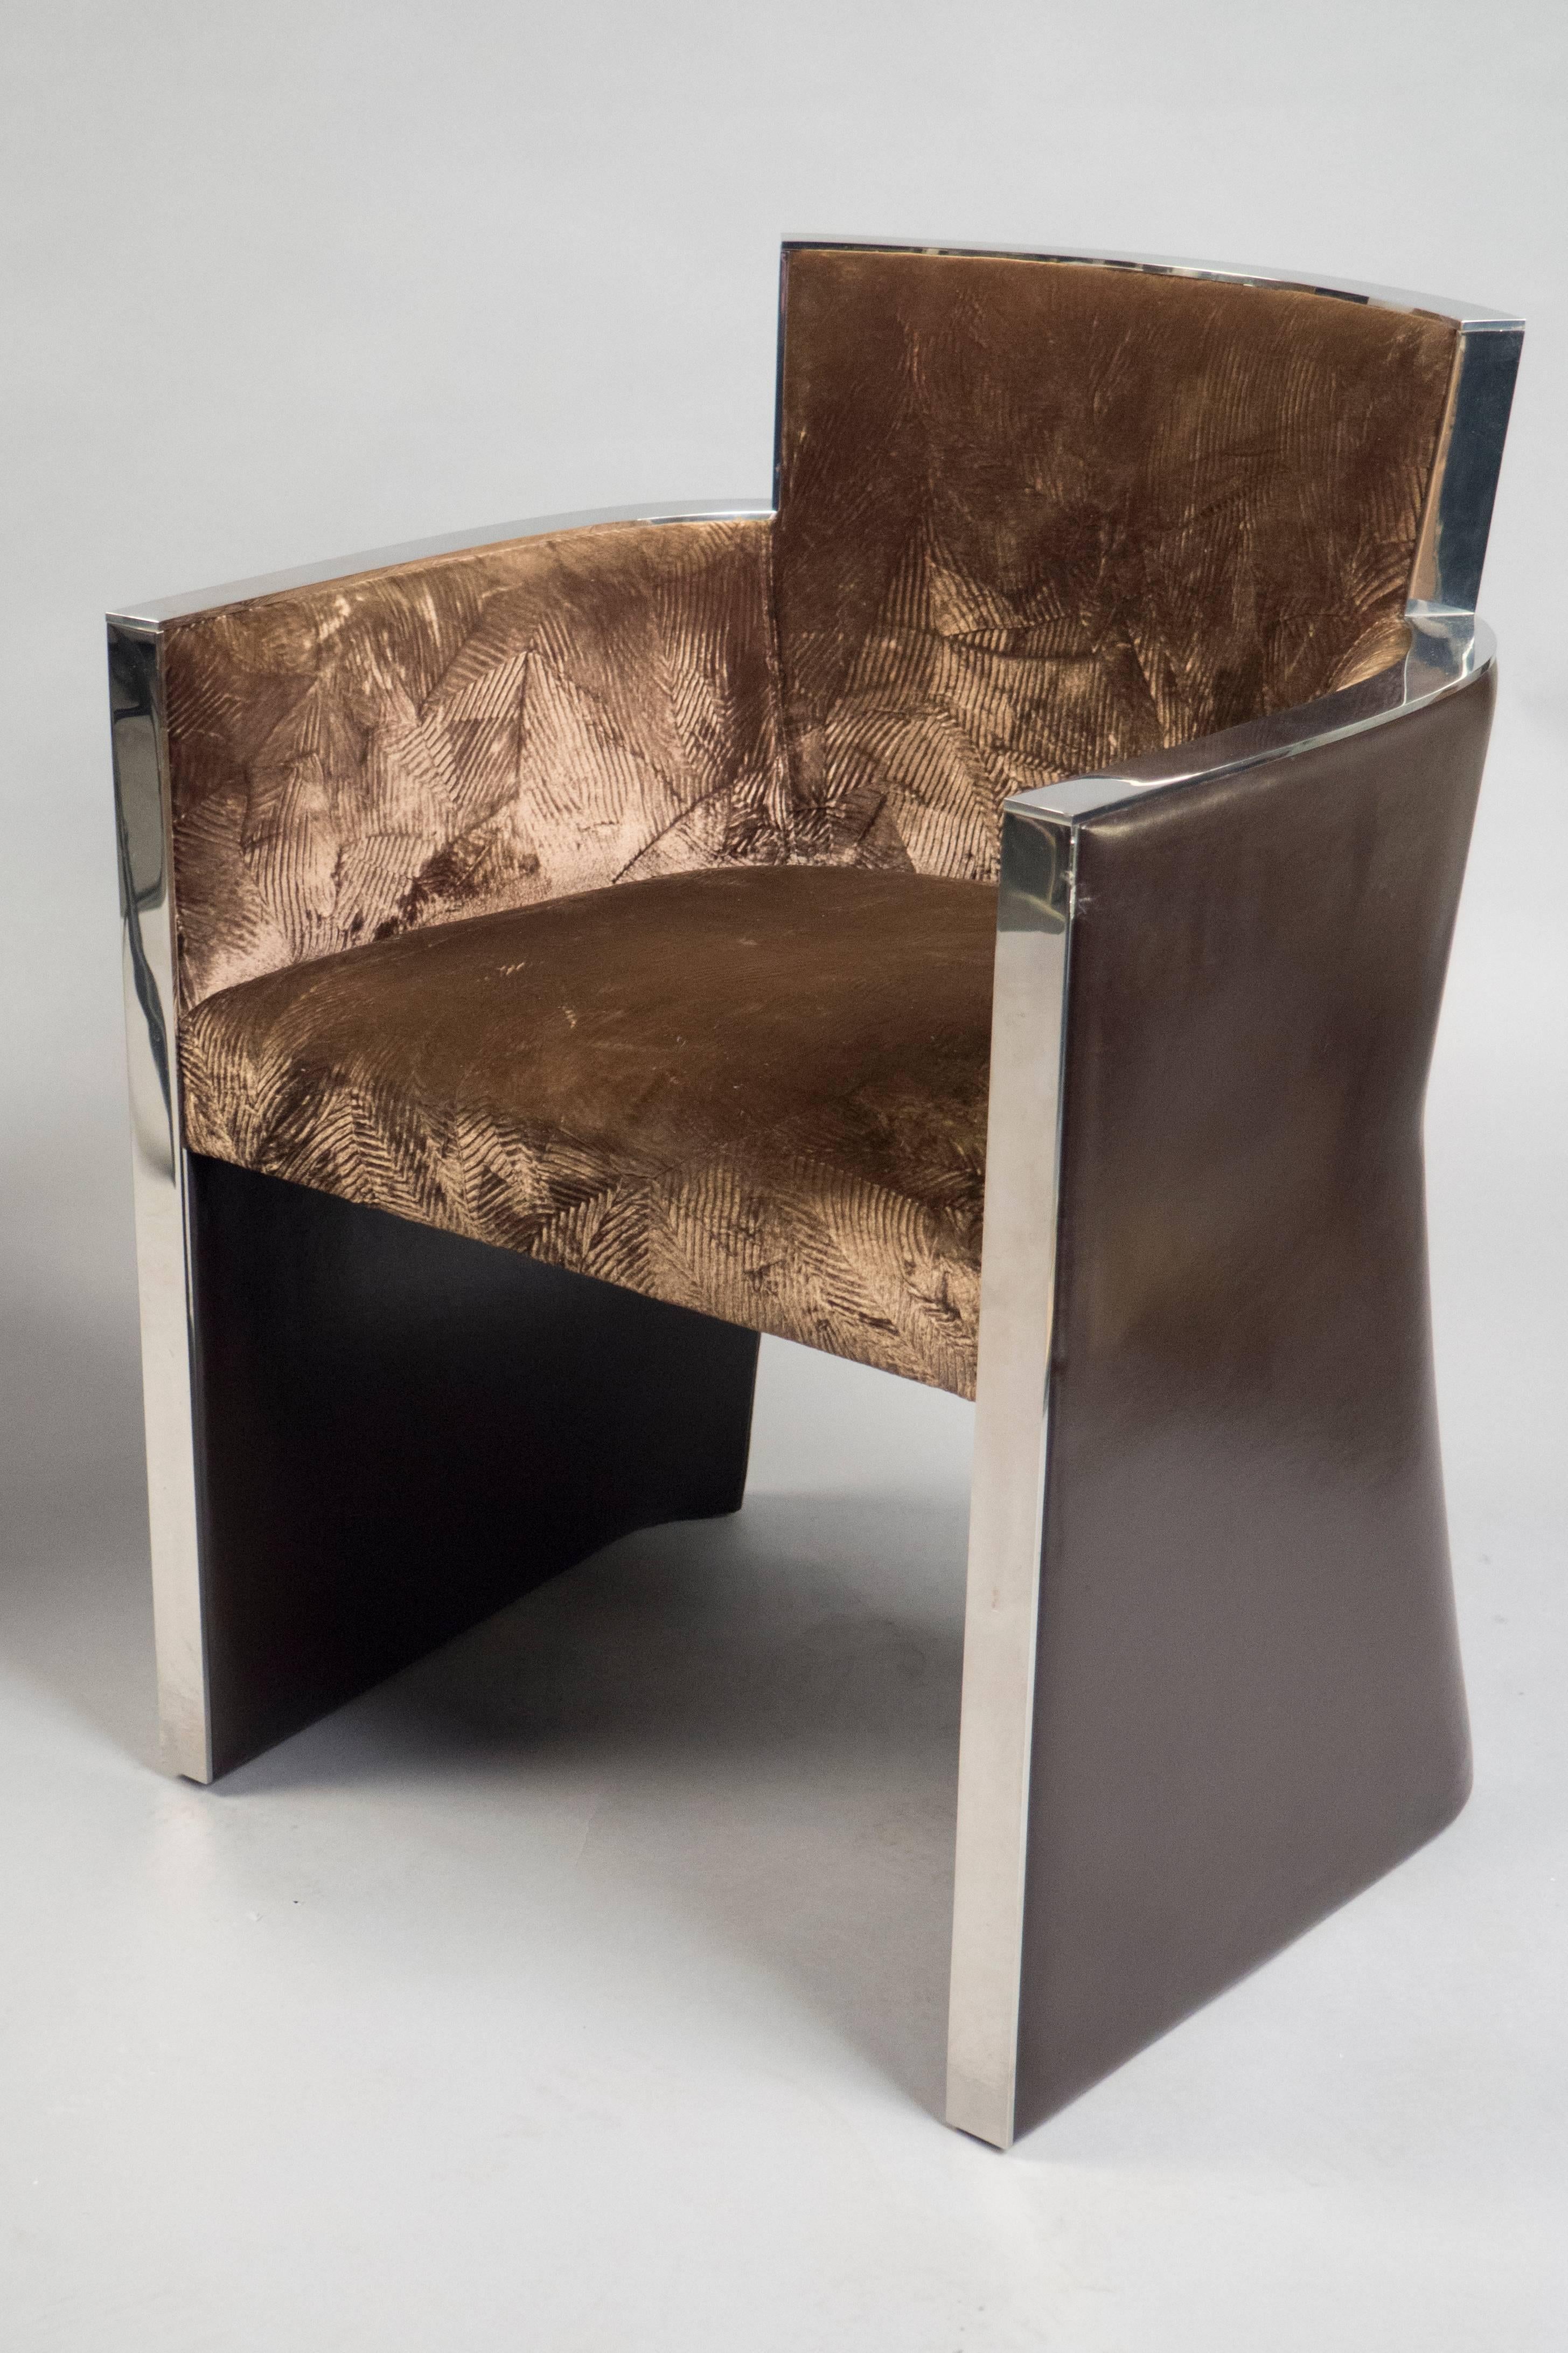 Inox steel frames featuring wraparound backs upholstered in dark brown leather, the seats and backs upholstered in the original crushed velvet with leaf pattern. These chairs were designed for the Fendi store in Milan in the 1990s. Two pairs